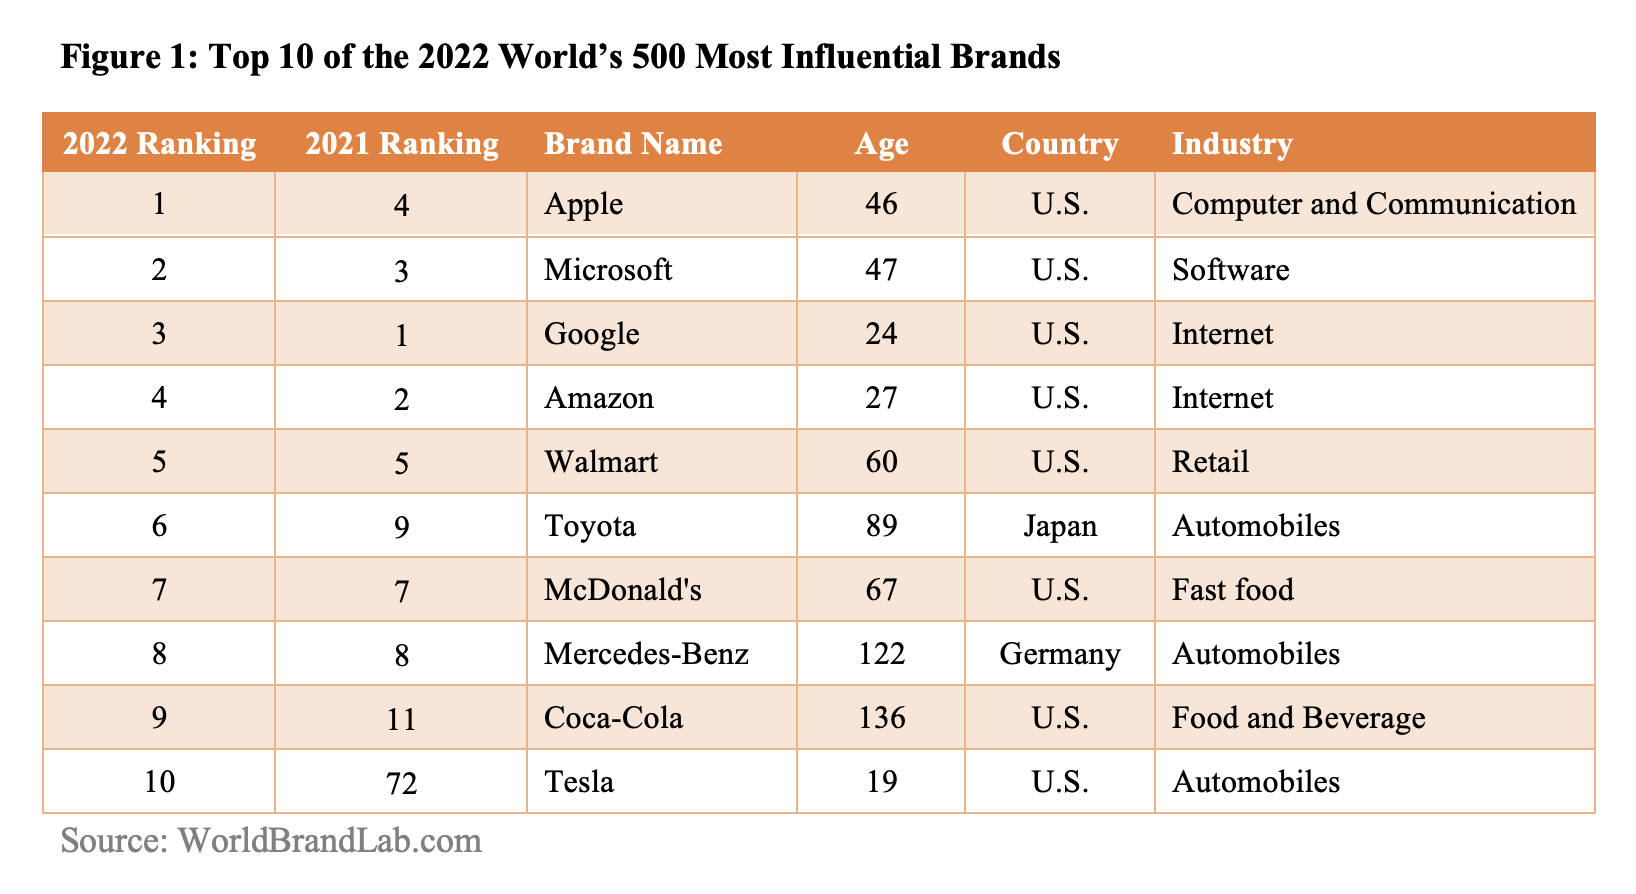 Top 10 of the 2022 World's 500 Most Influential Brands